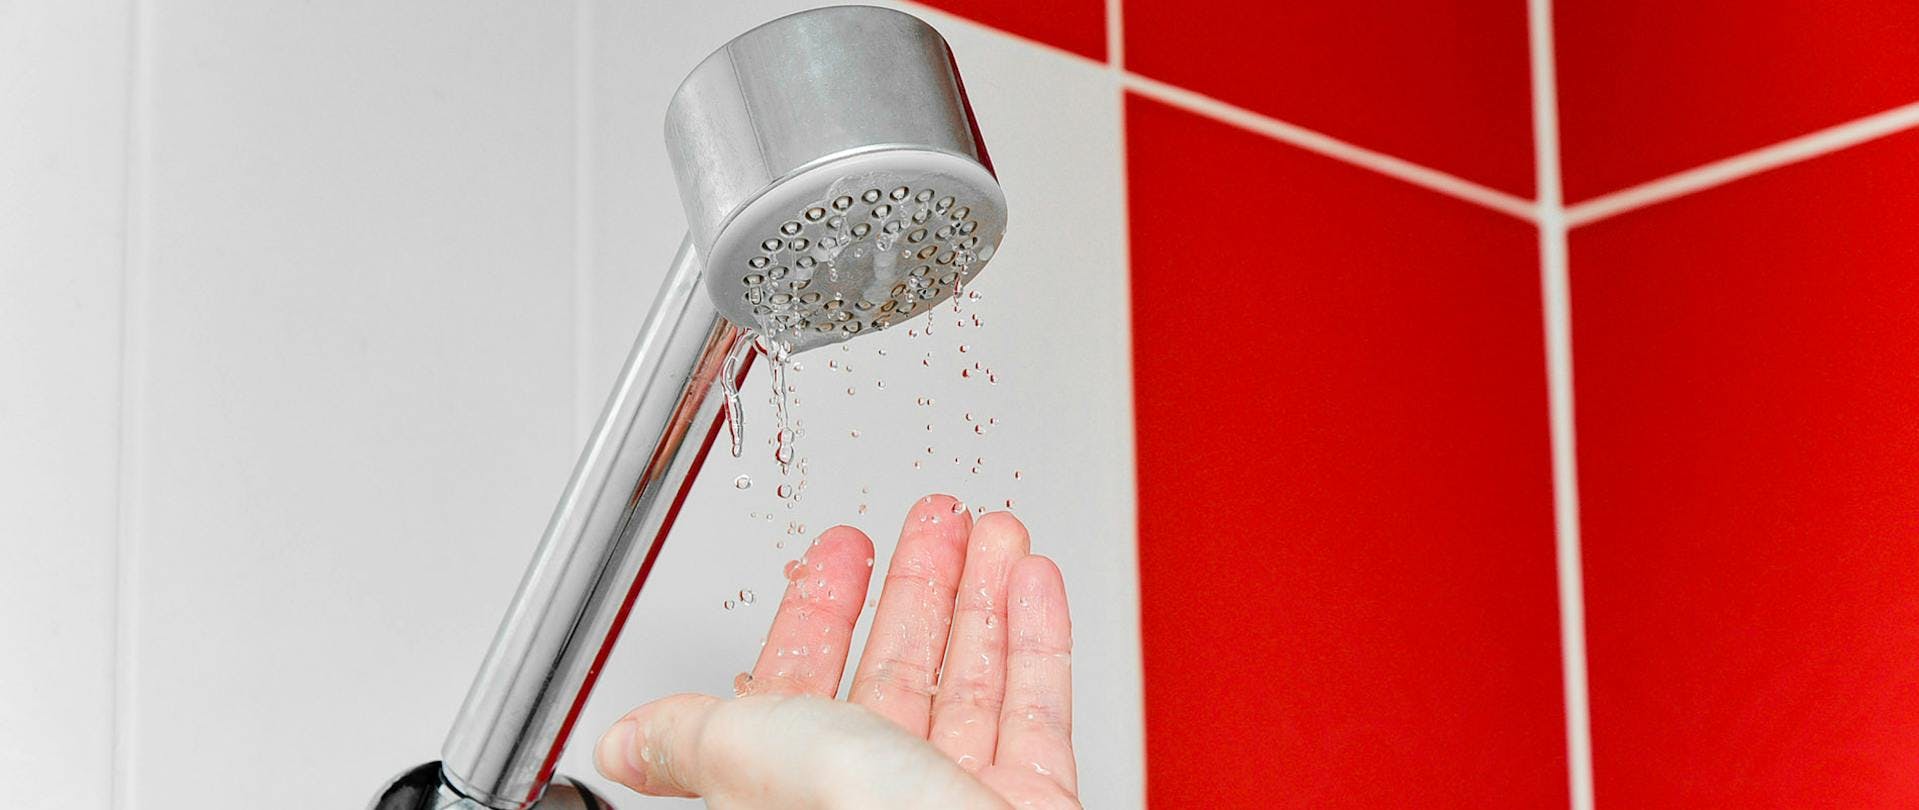 What to Do if You Have Low Water Pressure in Your House